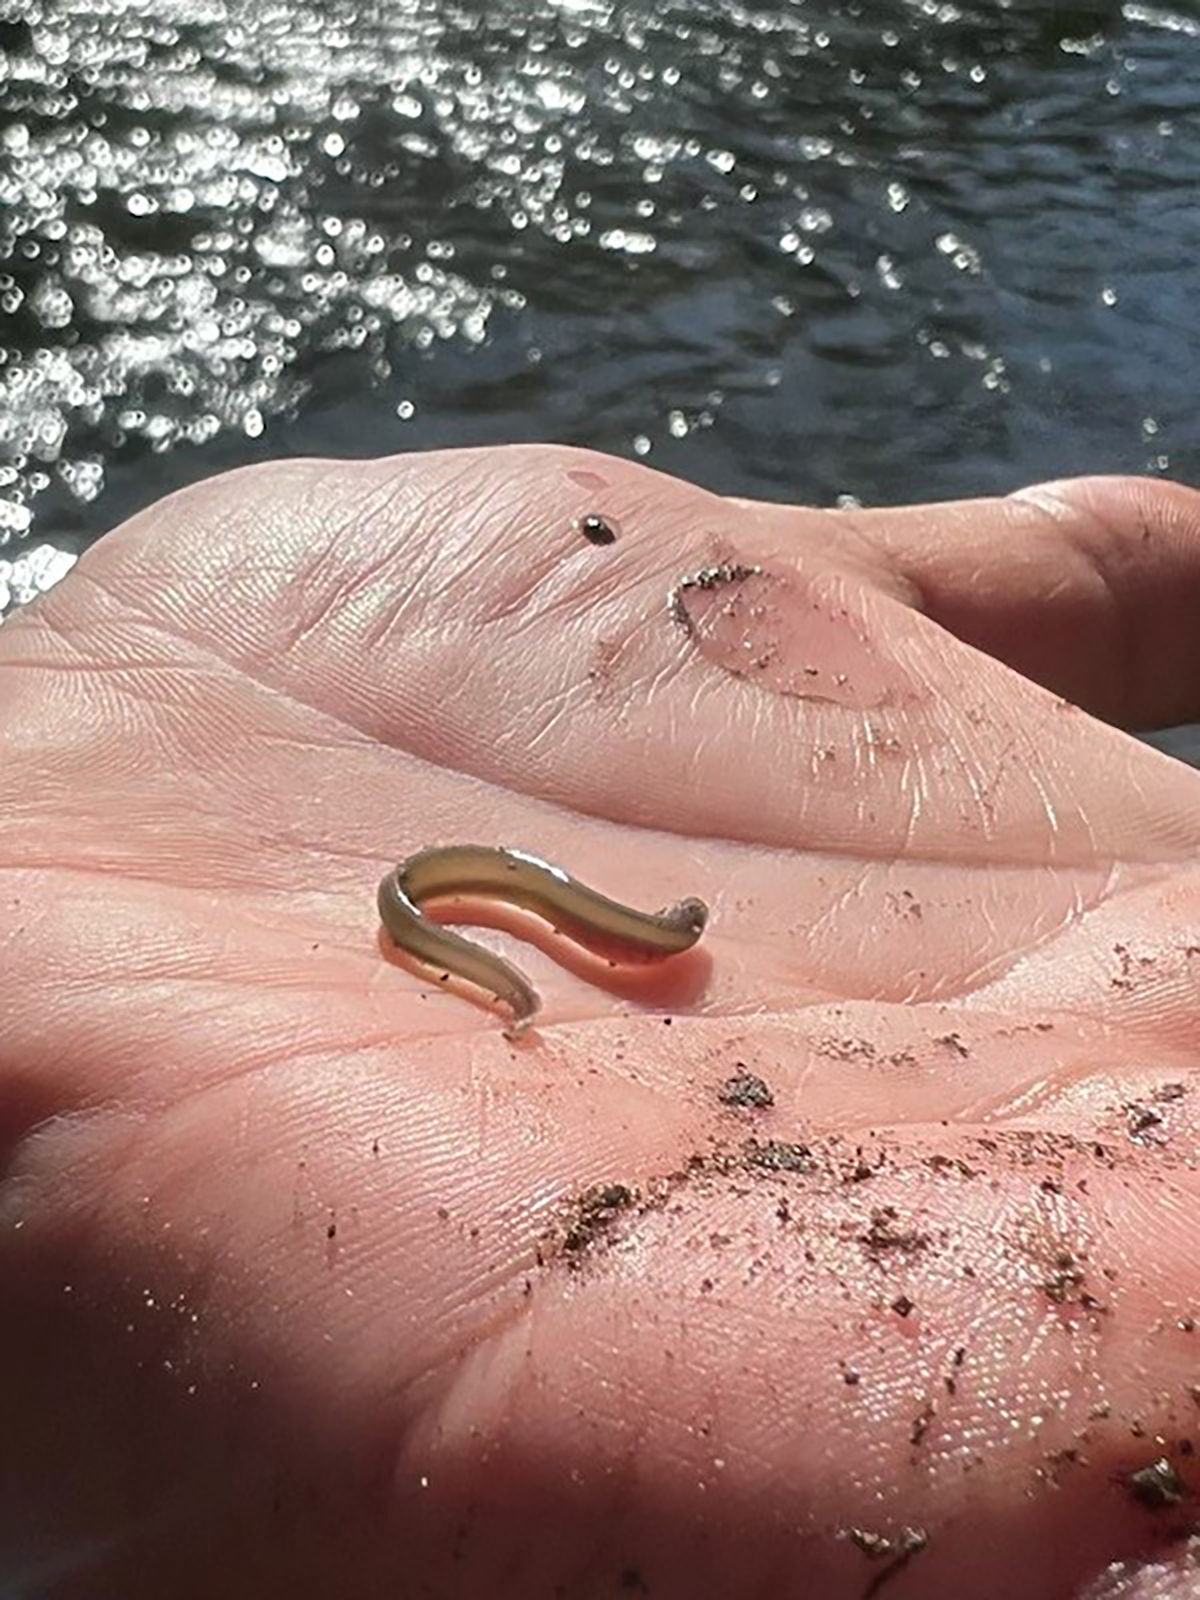 A tiny lamprey held in the palm of someone’s hand.